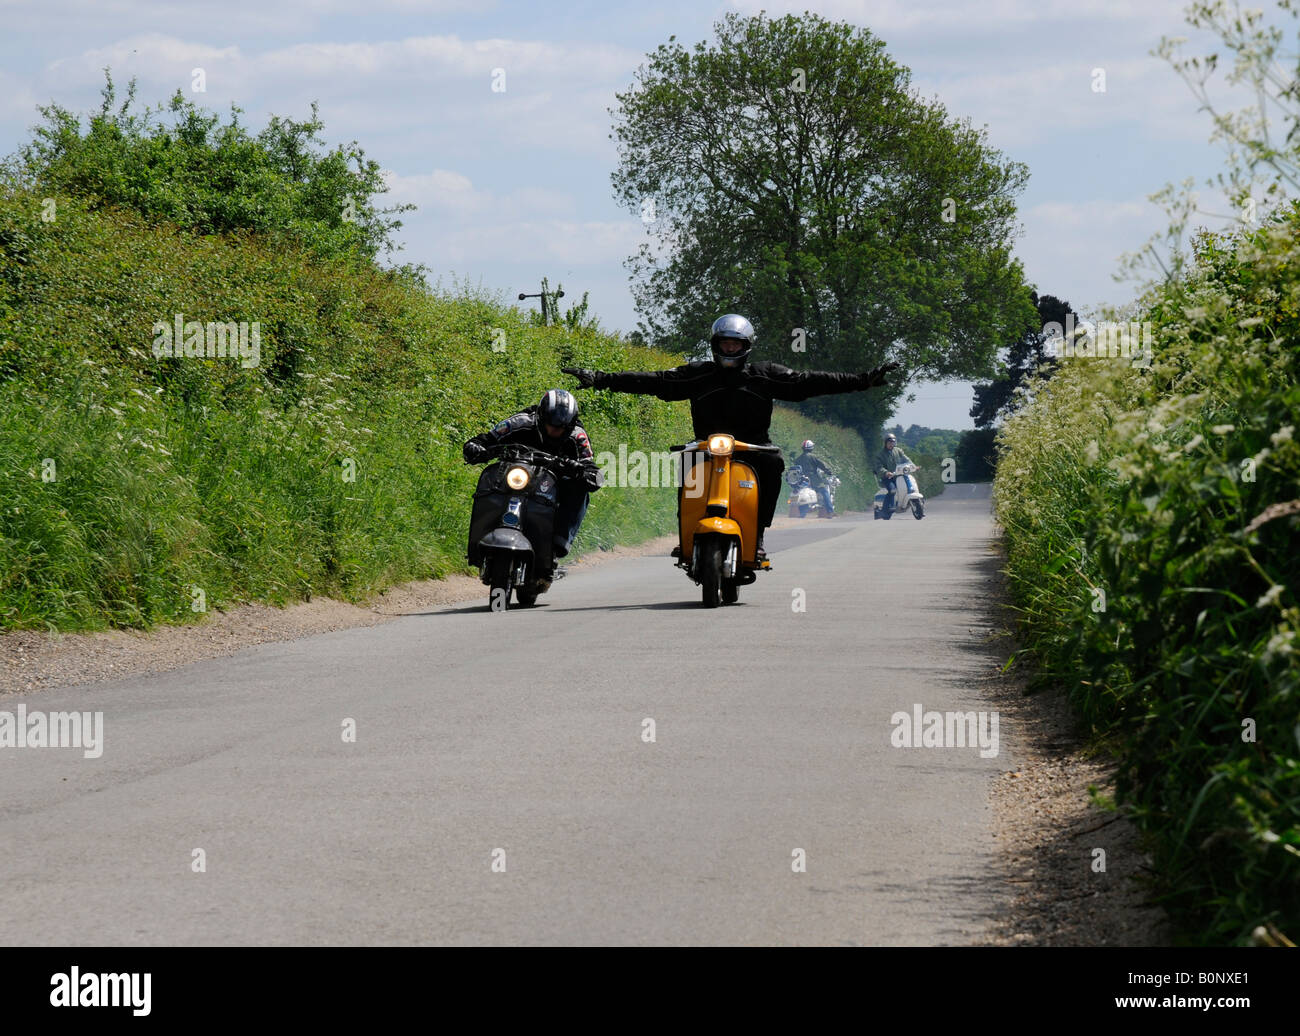 Scooter riders having fun on a country lane Stock Photo